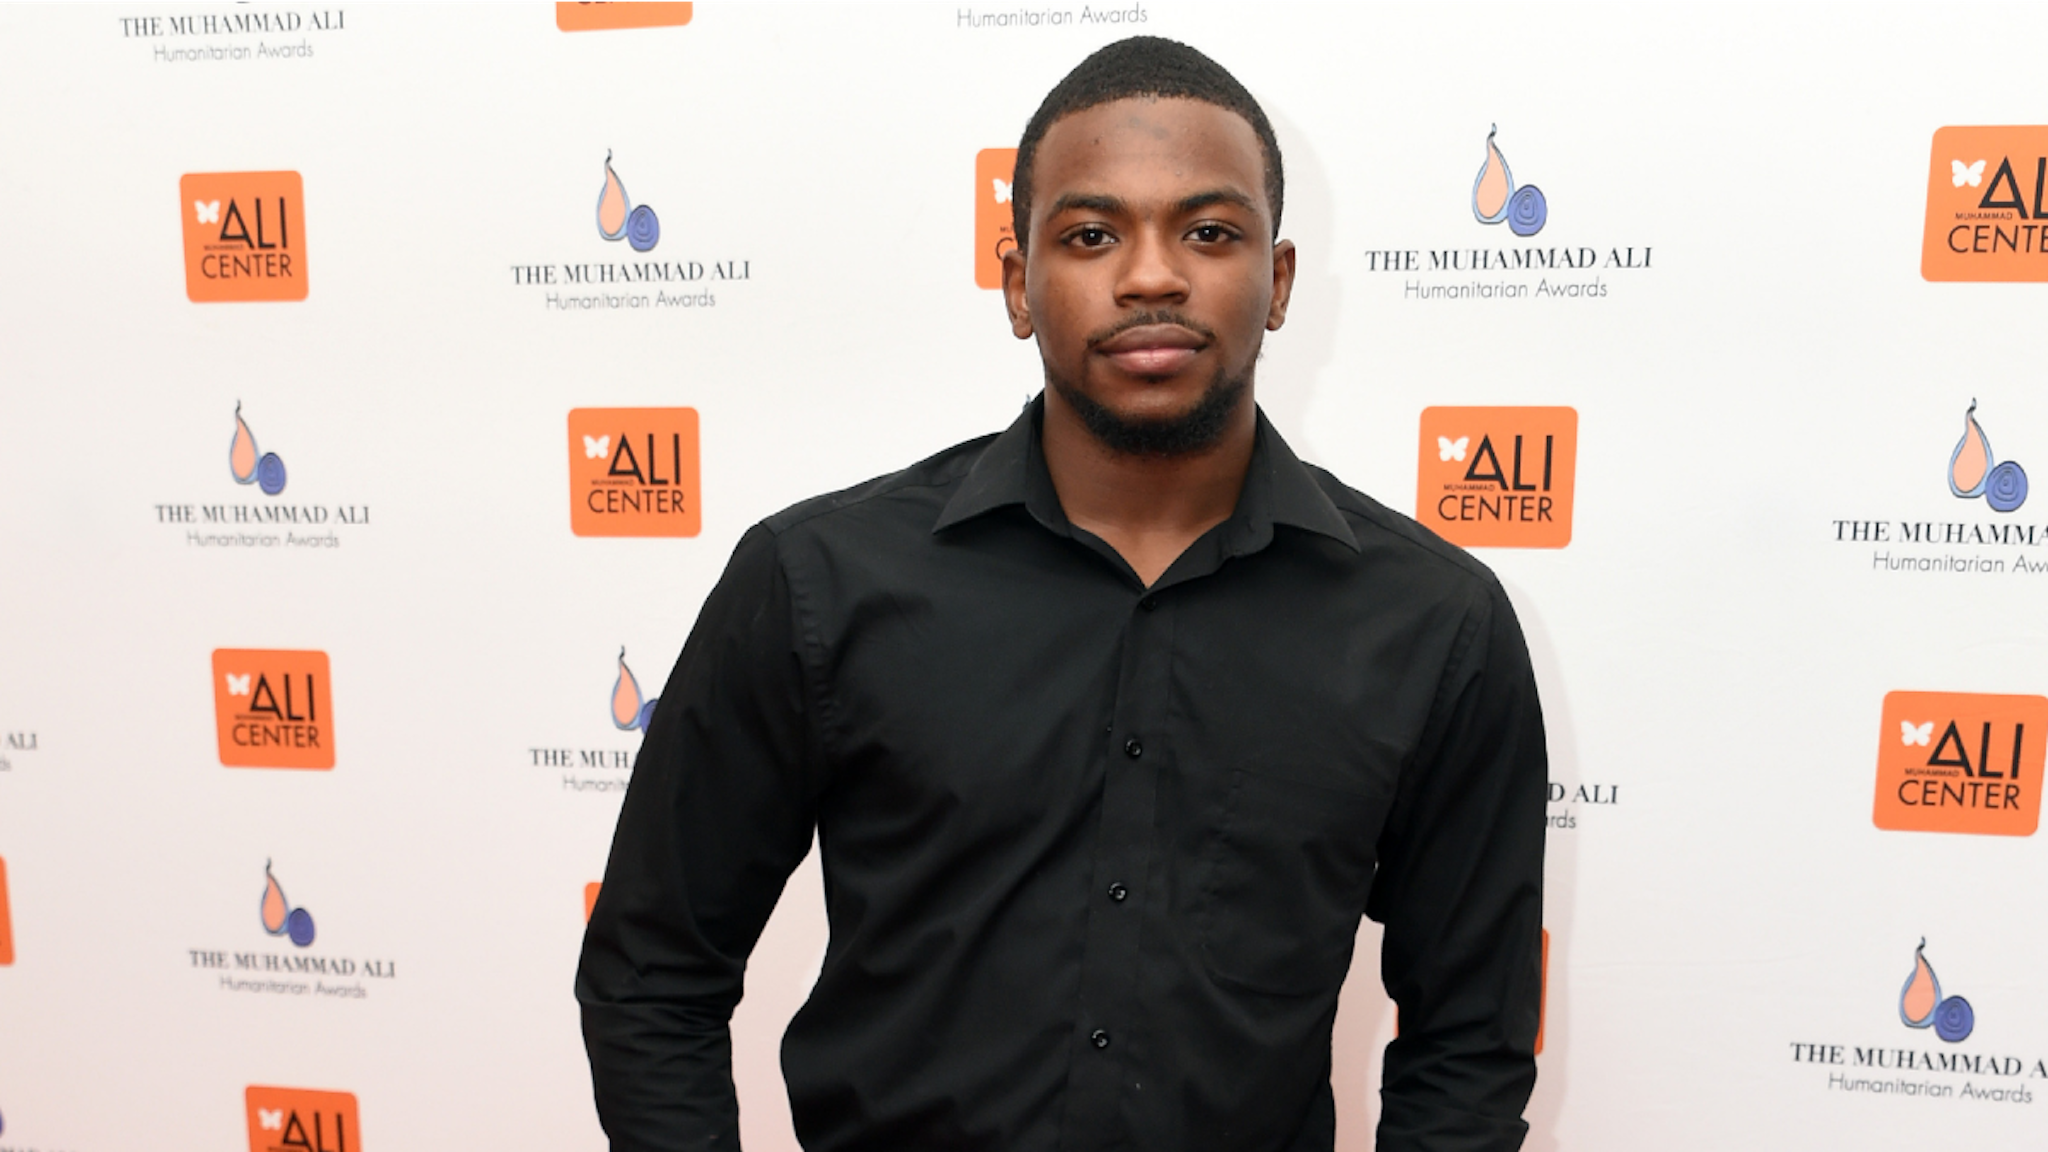 Quintez Brown attends the 7th Annual Muhammad Ali Humanitarian Awards at Downtown Marriott on September 12, 2019 in Louisville, Kentucky.